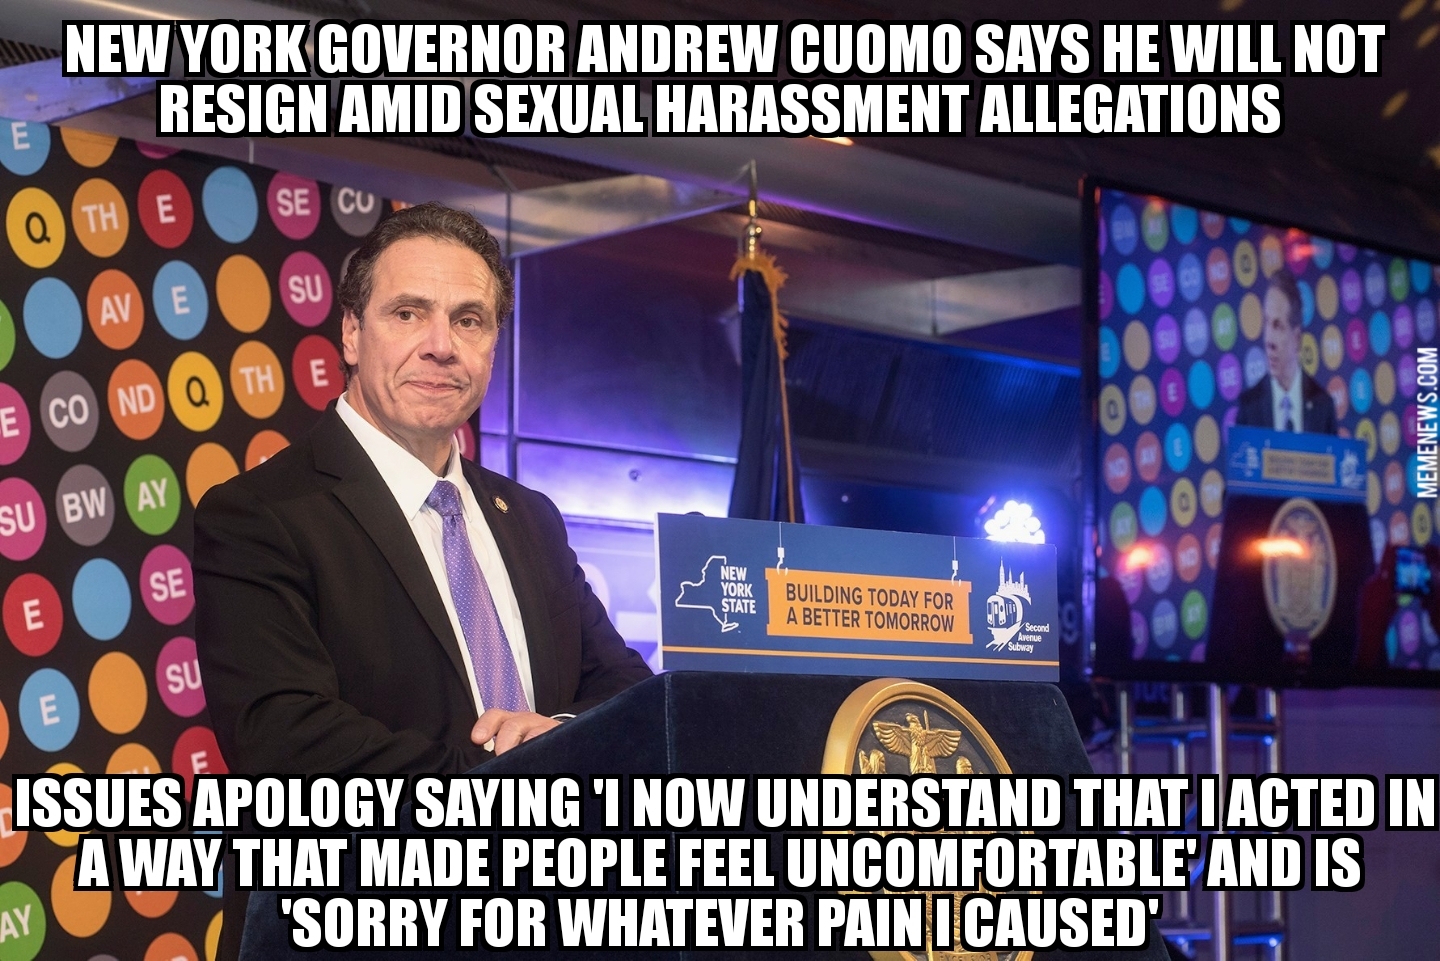 Andrew Cuomo issues apology, won’t resign